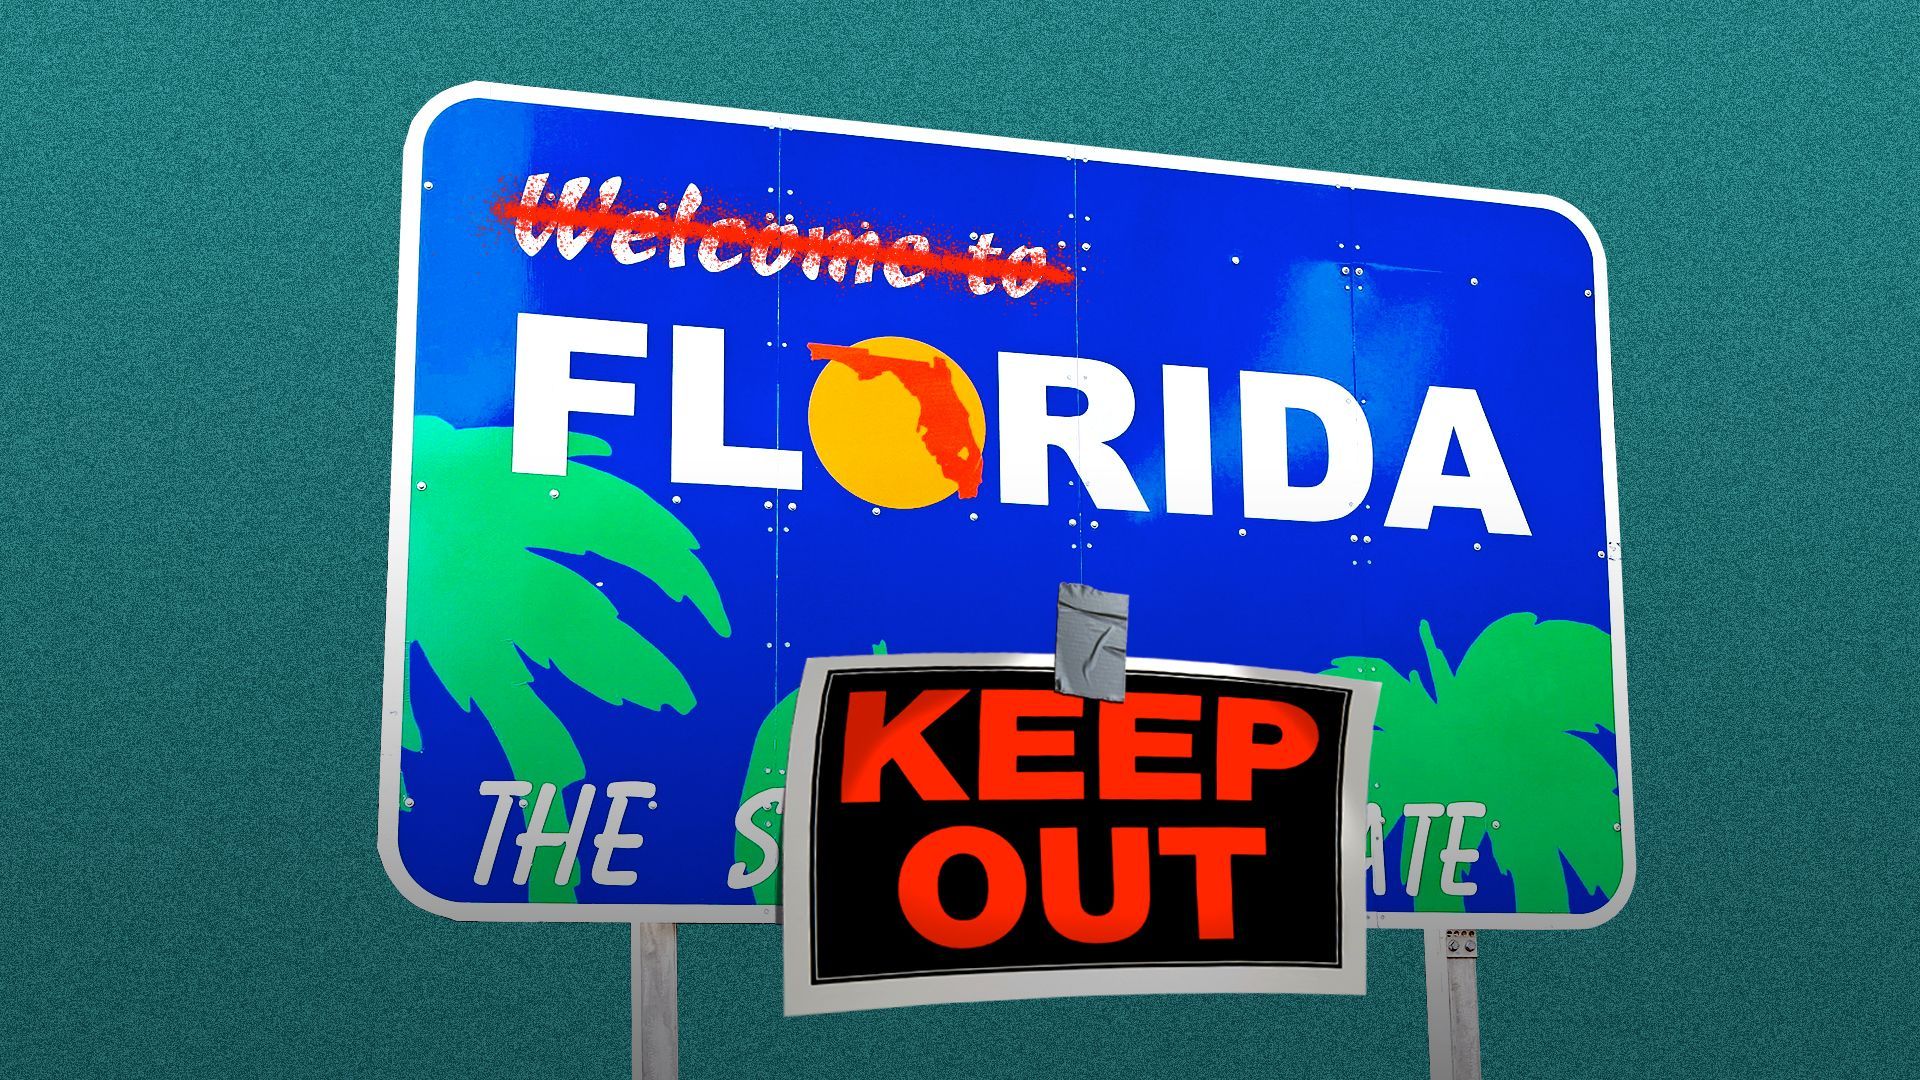 Illustration of a welcome to Florida sign with the words WELCOME TO crossed out with spray paint, and a keep out sign affixed to it with duct tape.